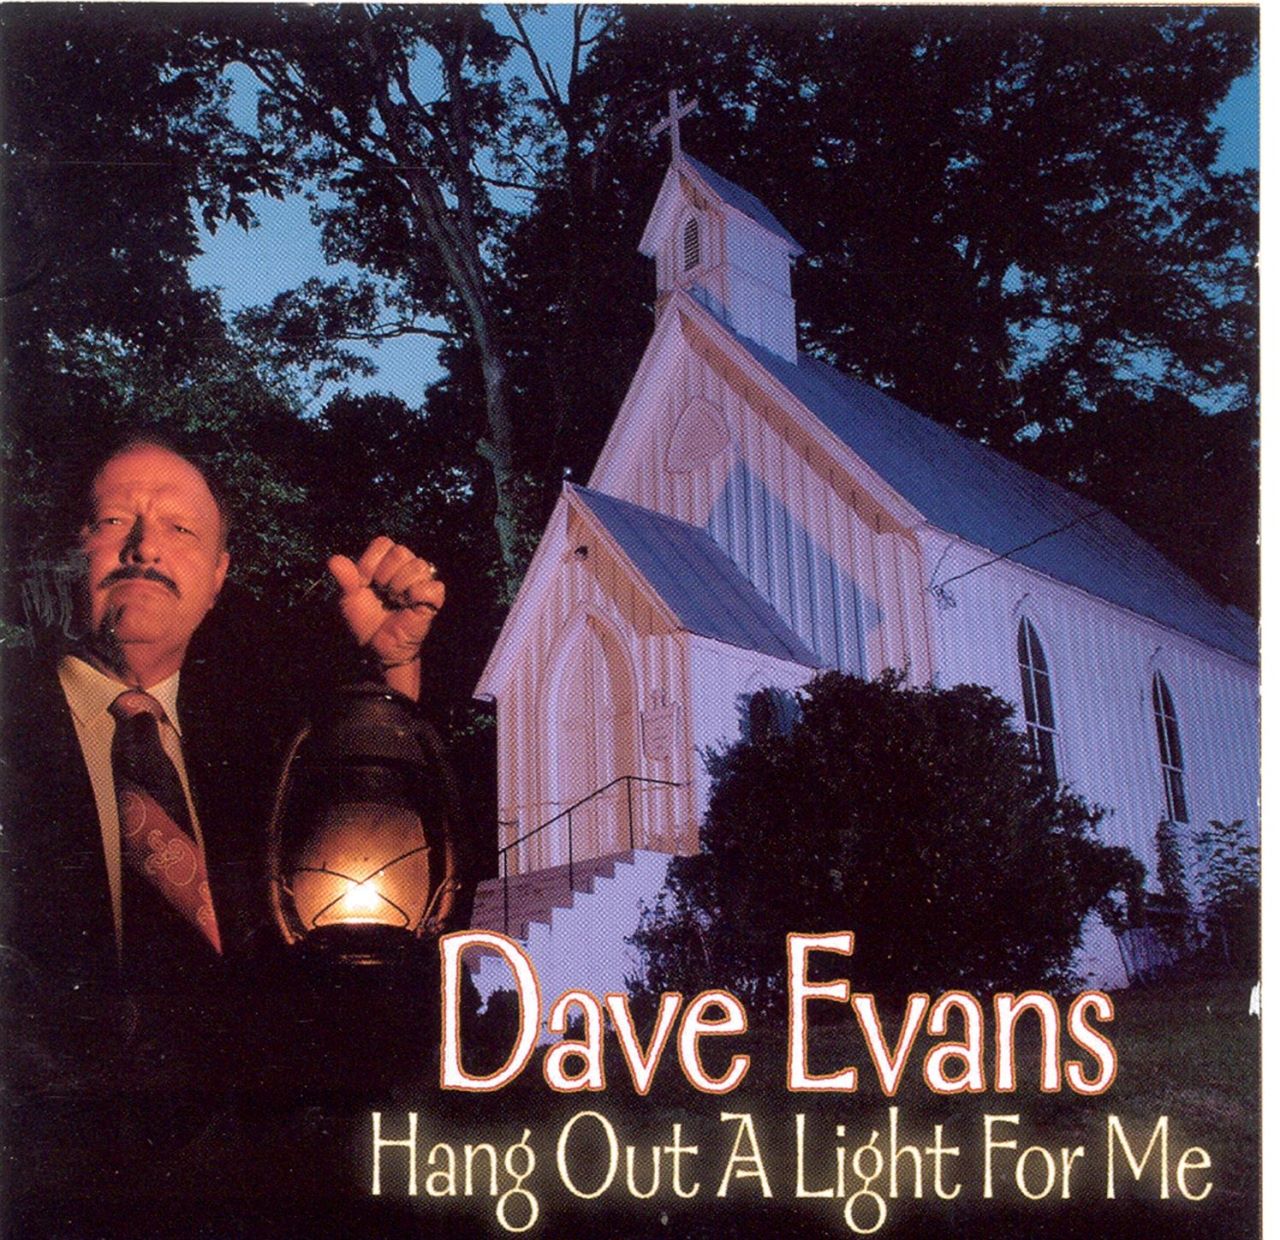 Dave Evans - Hang Out A Light For Me cover album